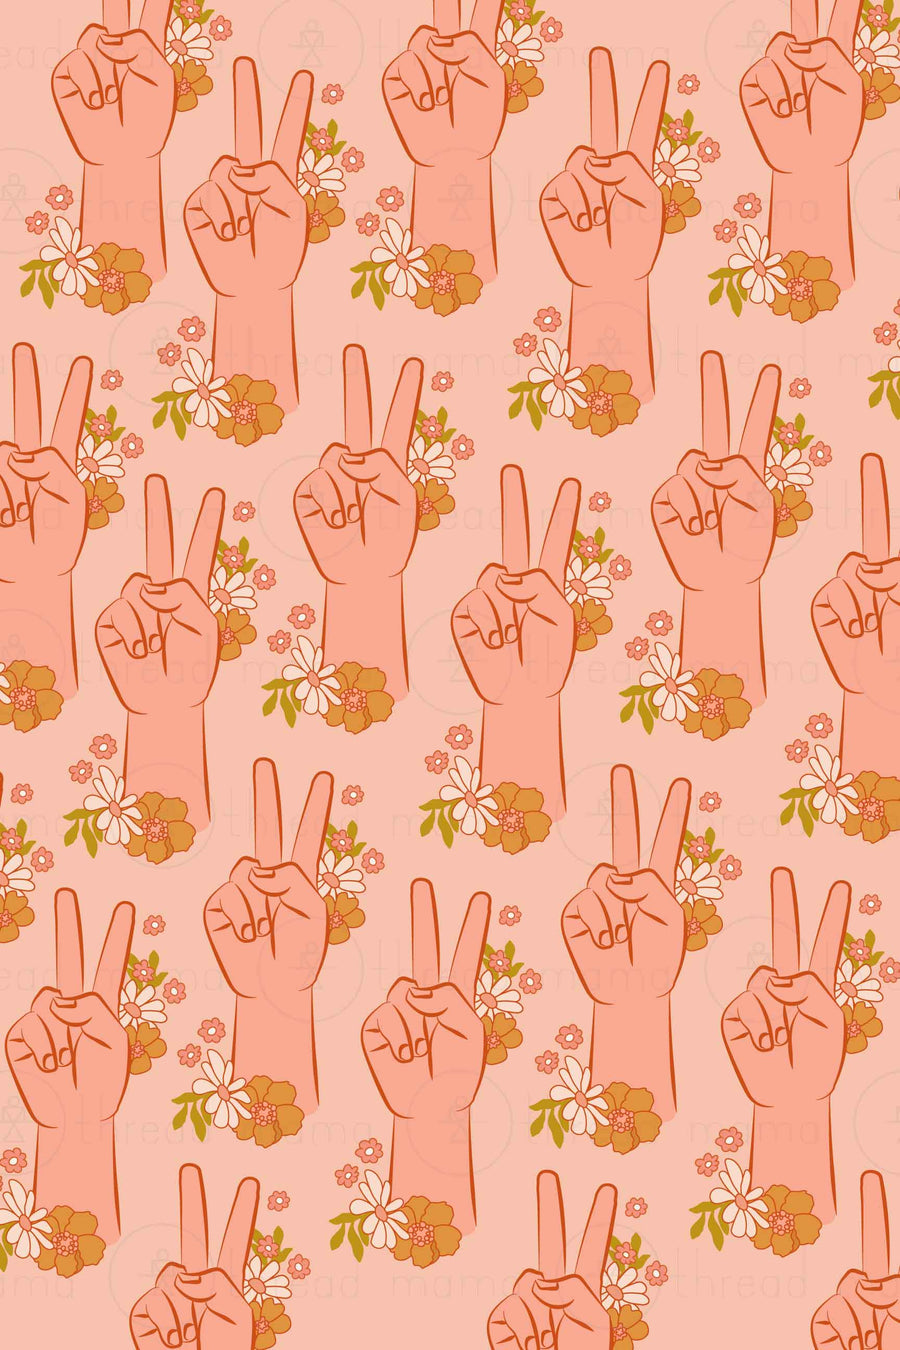 Peace Hand Pattern (Printable Poster)